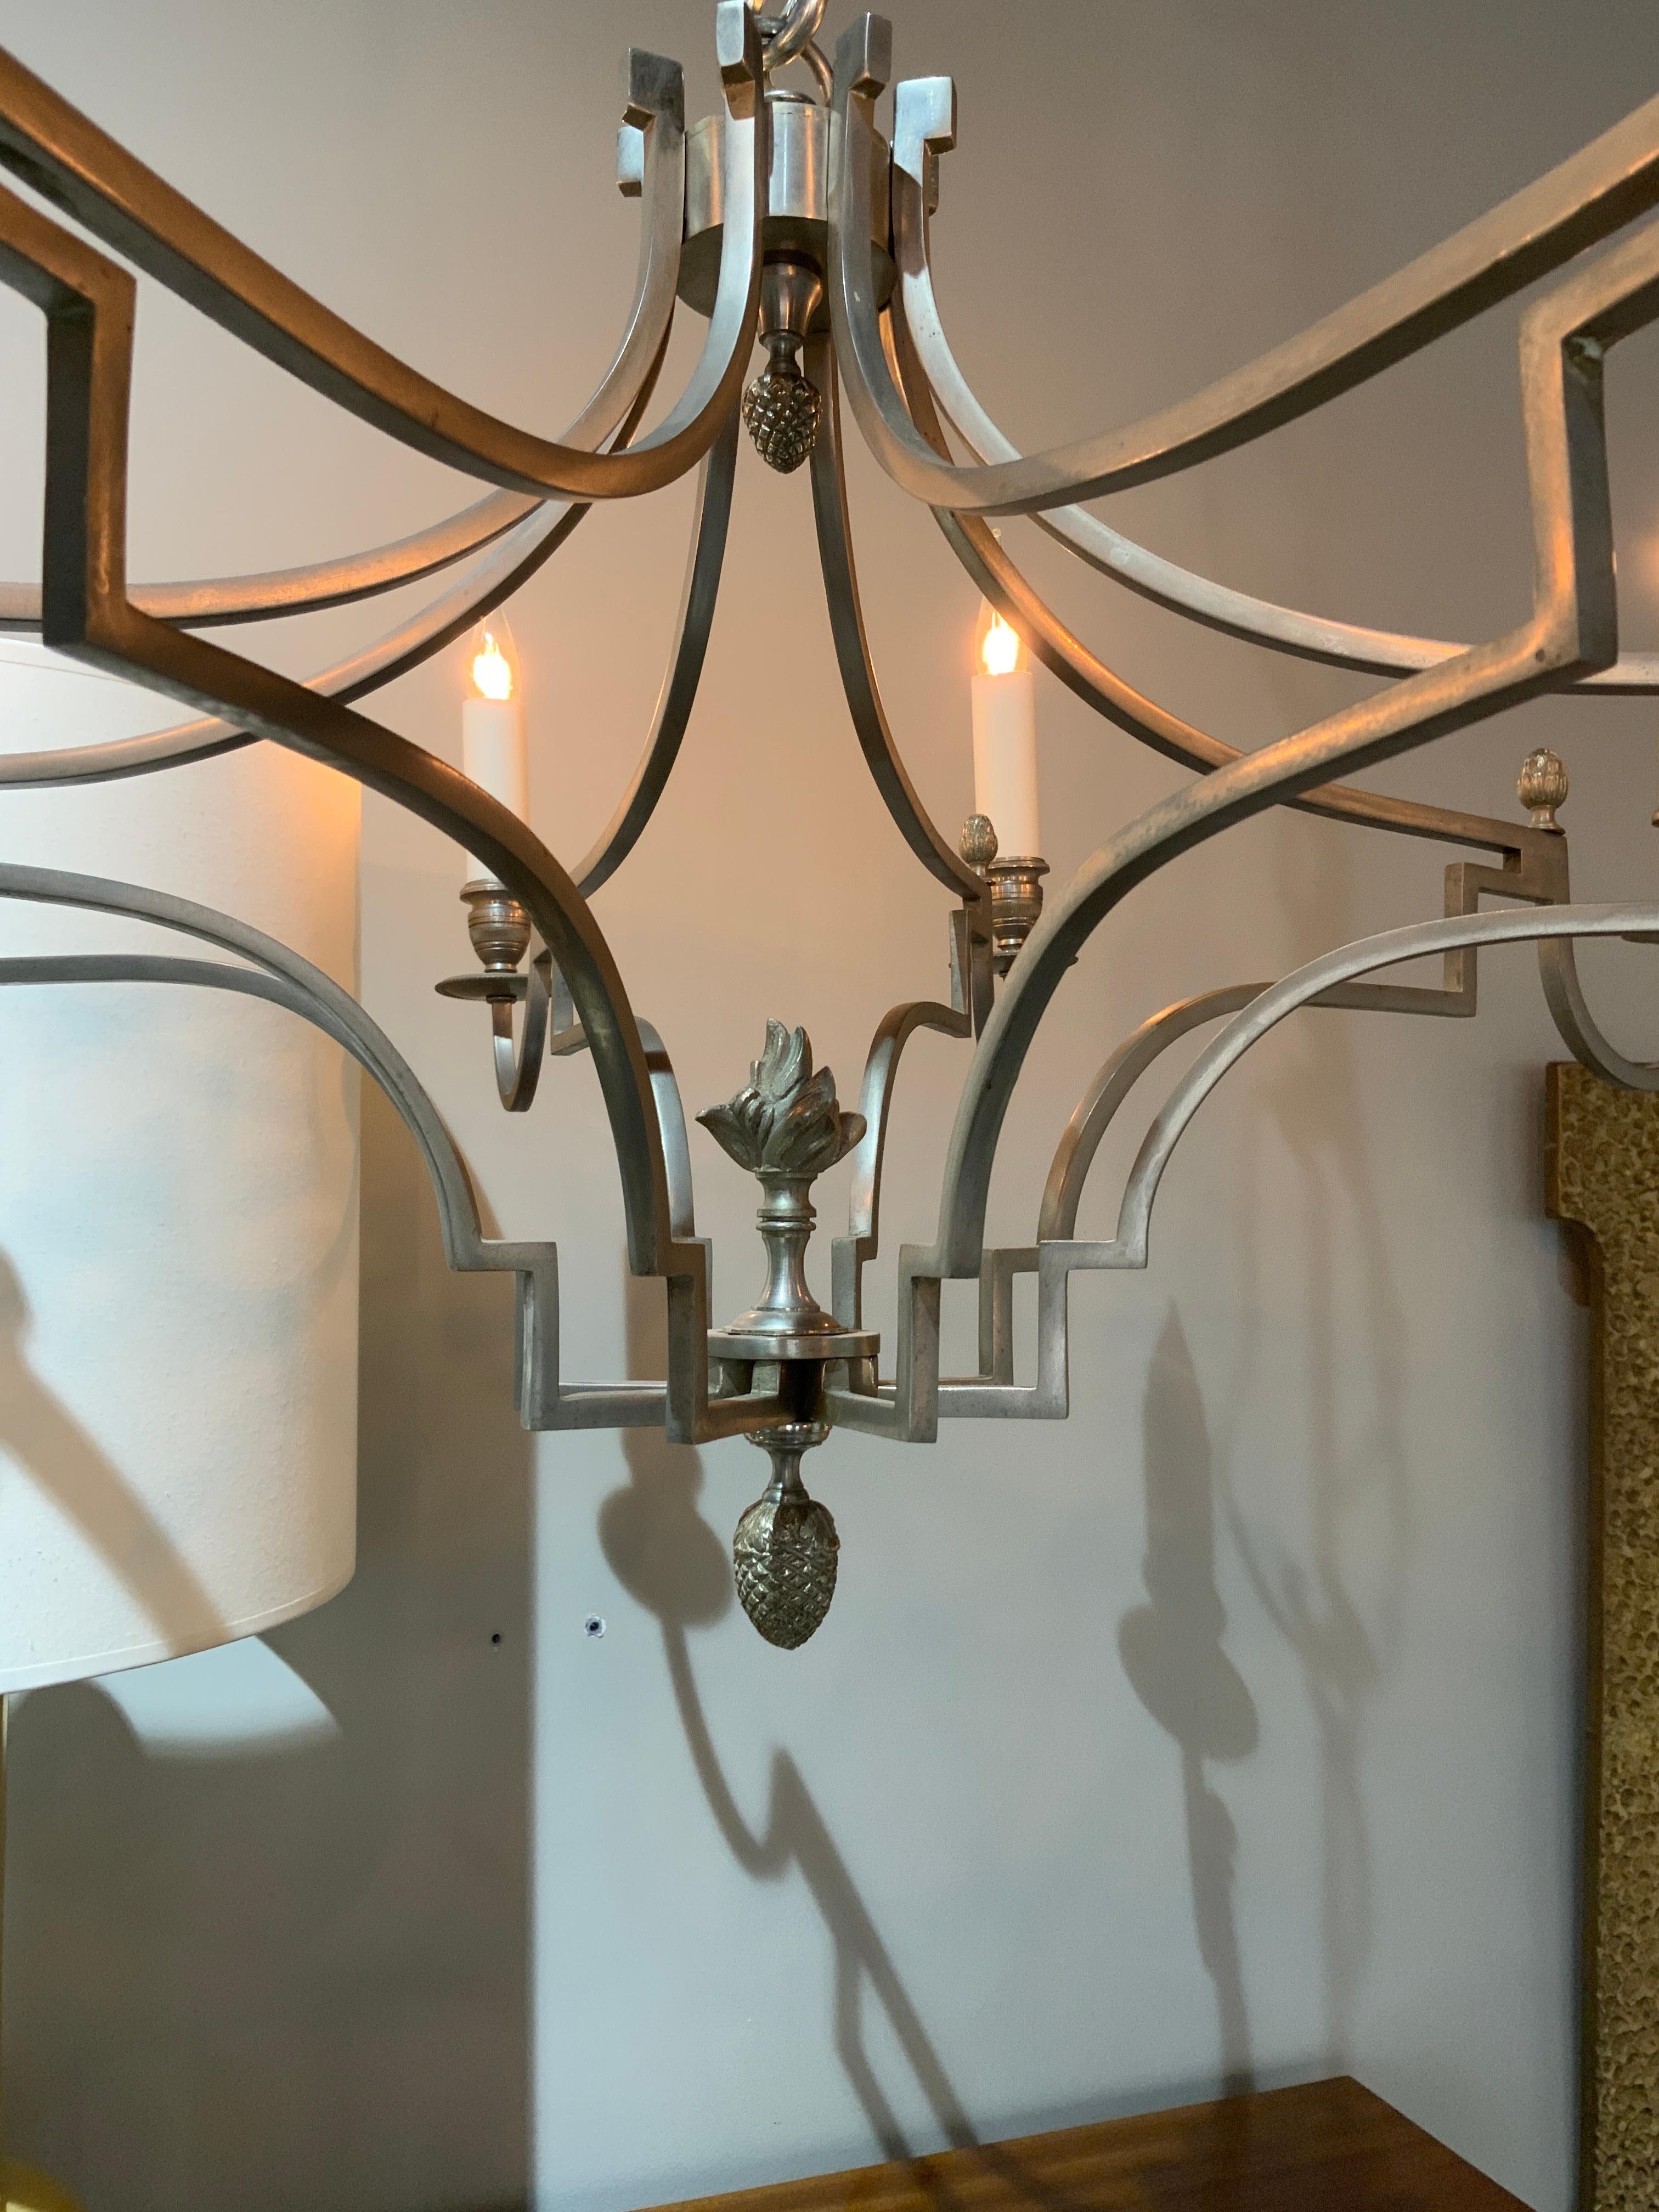 A very elegant French chandelier in steel by Maison Charles circa 1970
8 lights 